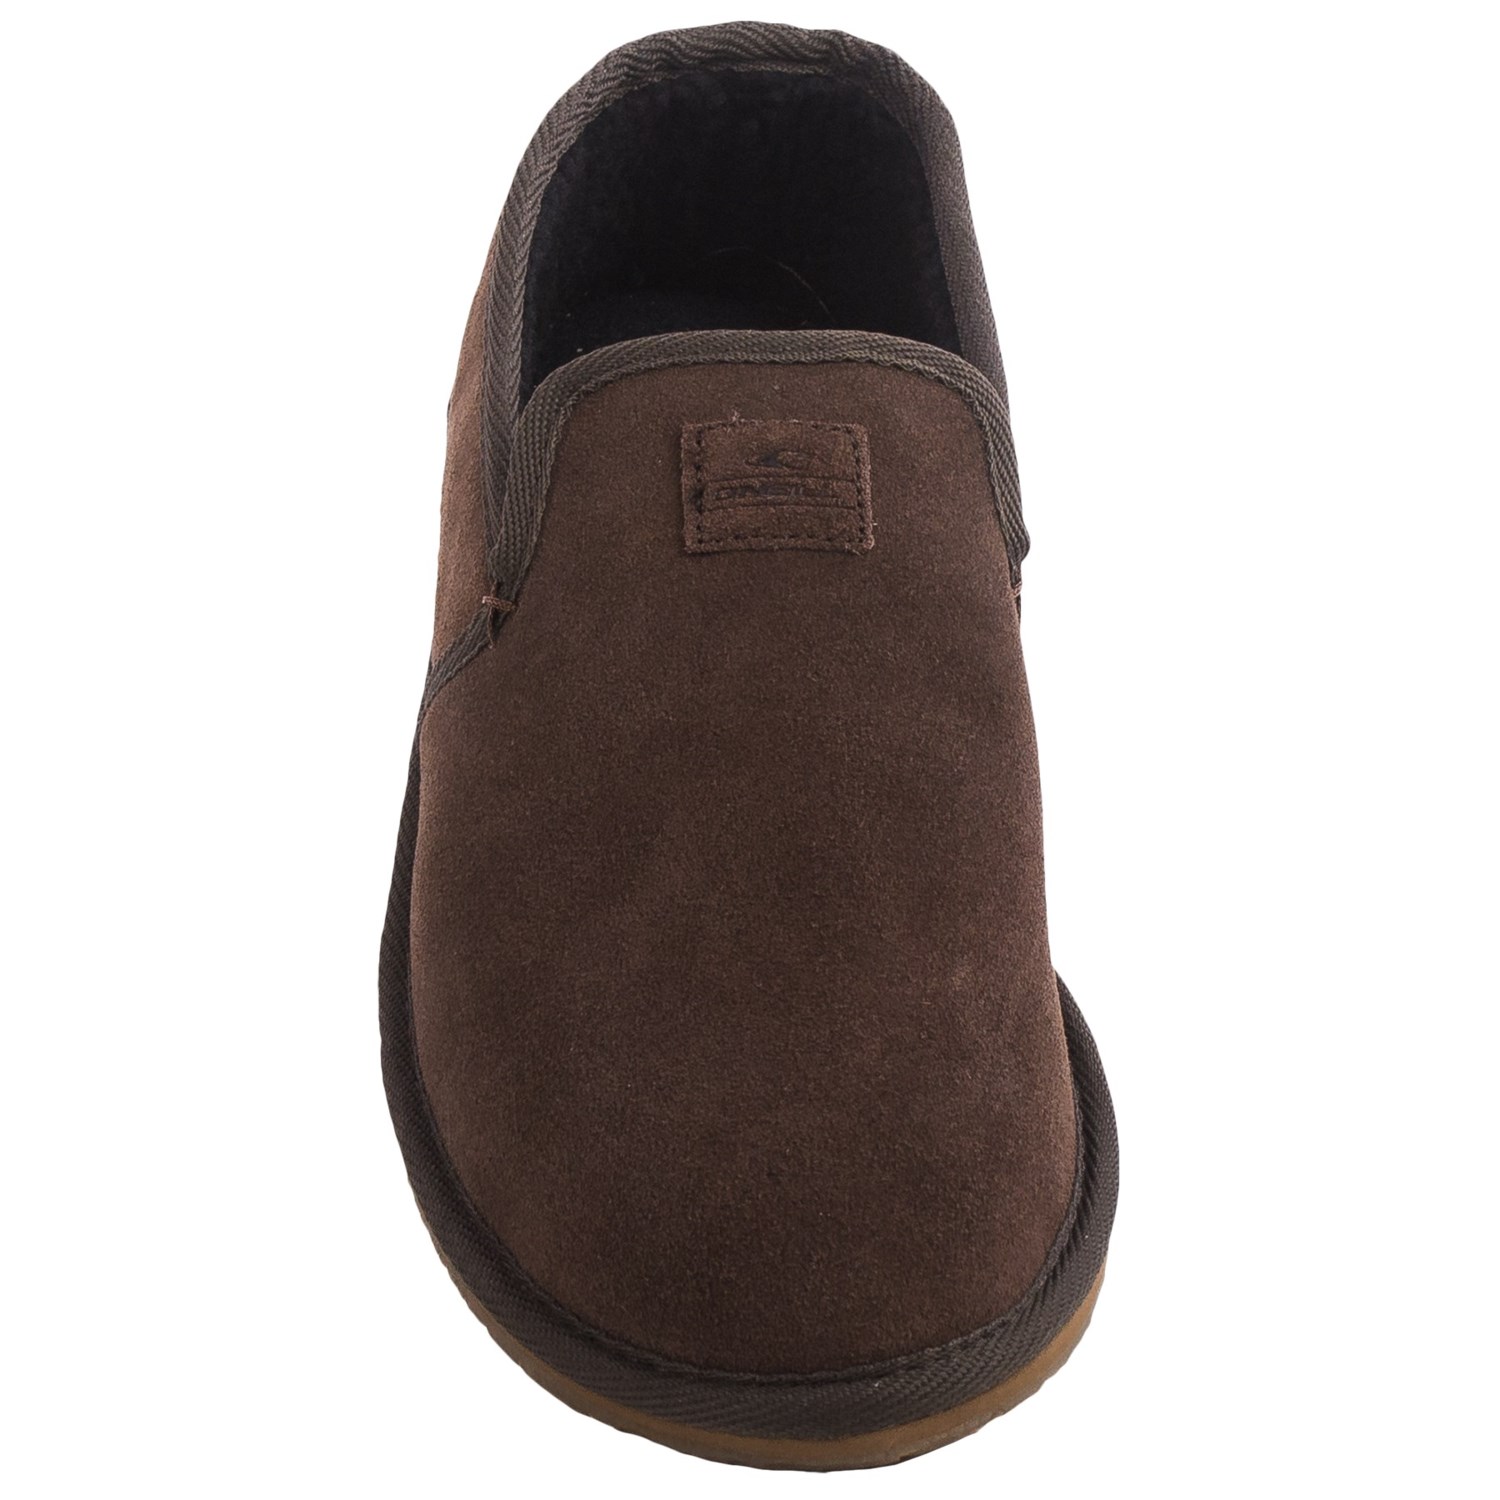 O’Neill Surf Turkey Low Suede Slippers (For Men) - Save 78%